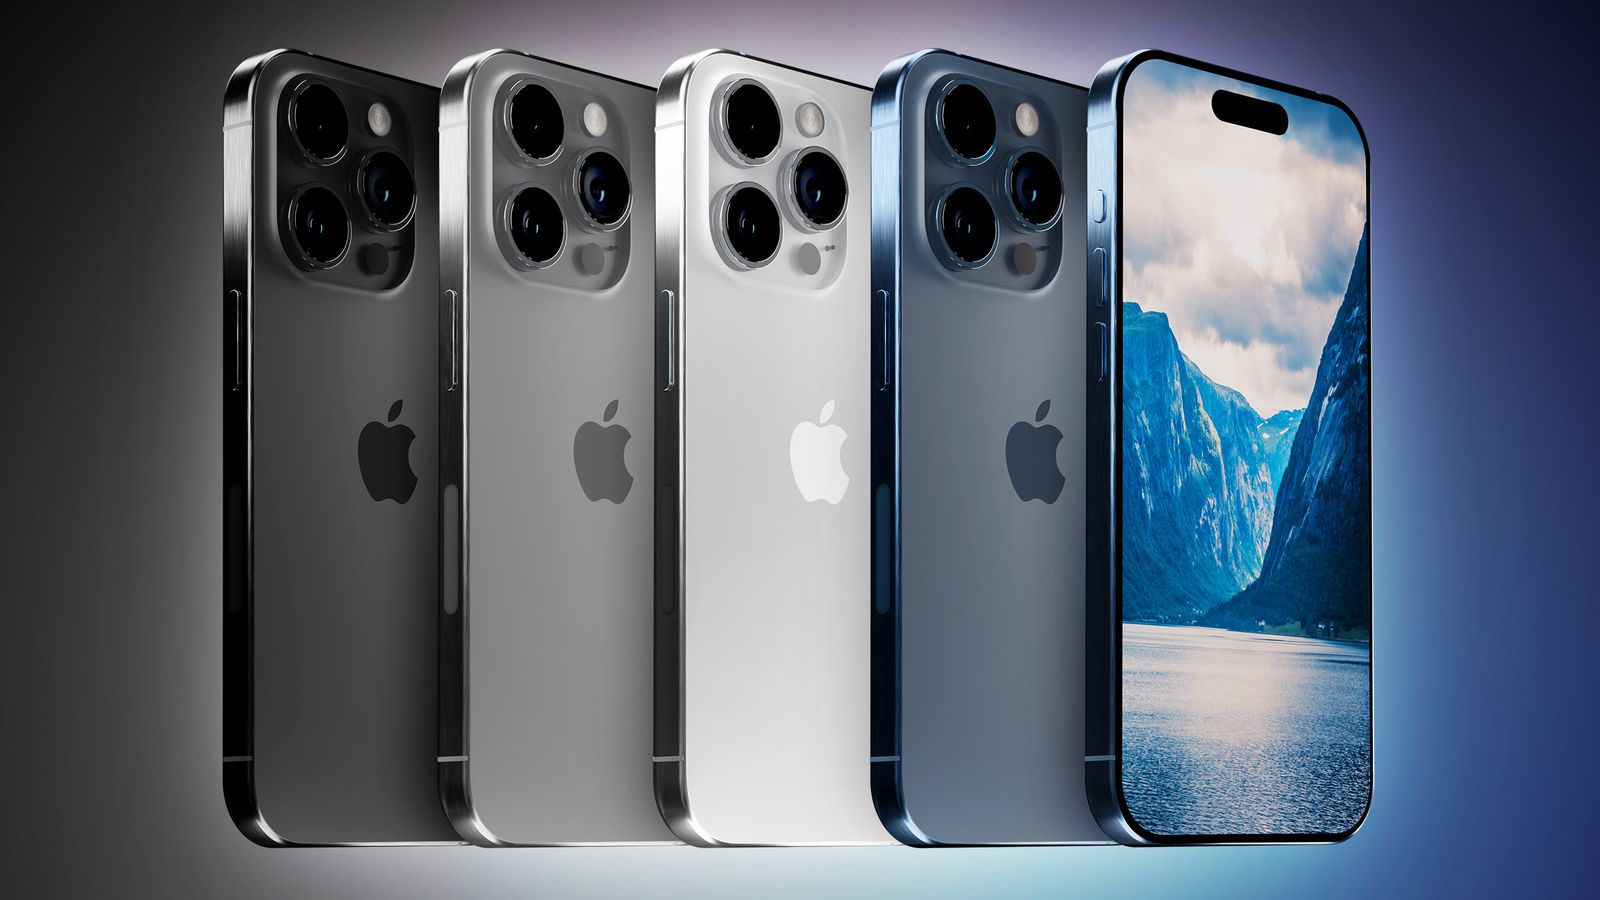 iPhone 15 Pro Expected Next Week With These 12 New Features - MacRumors